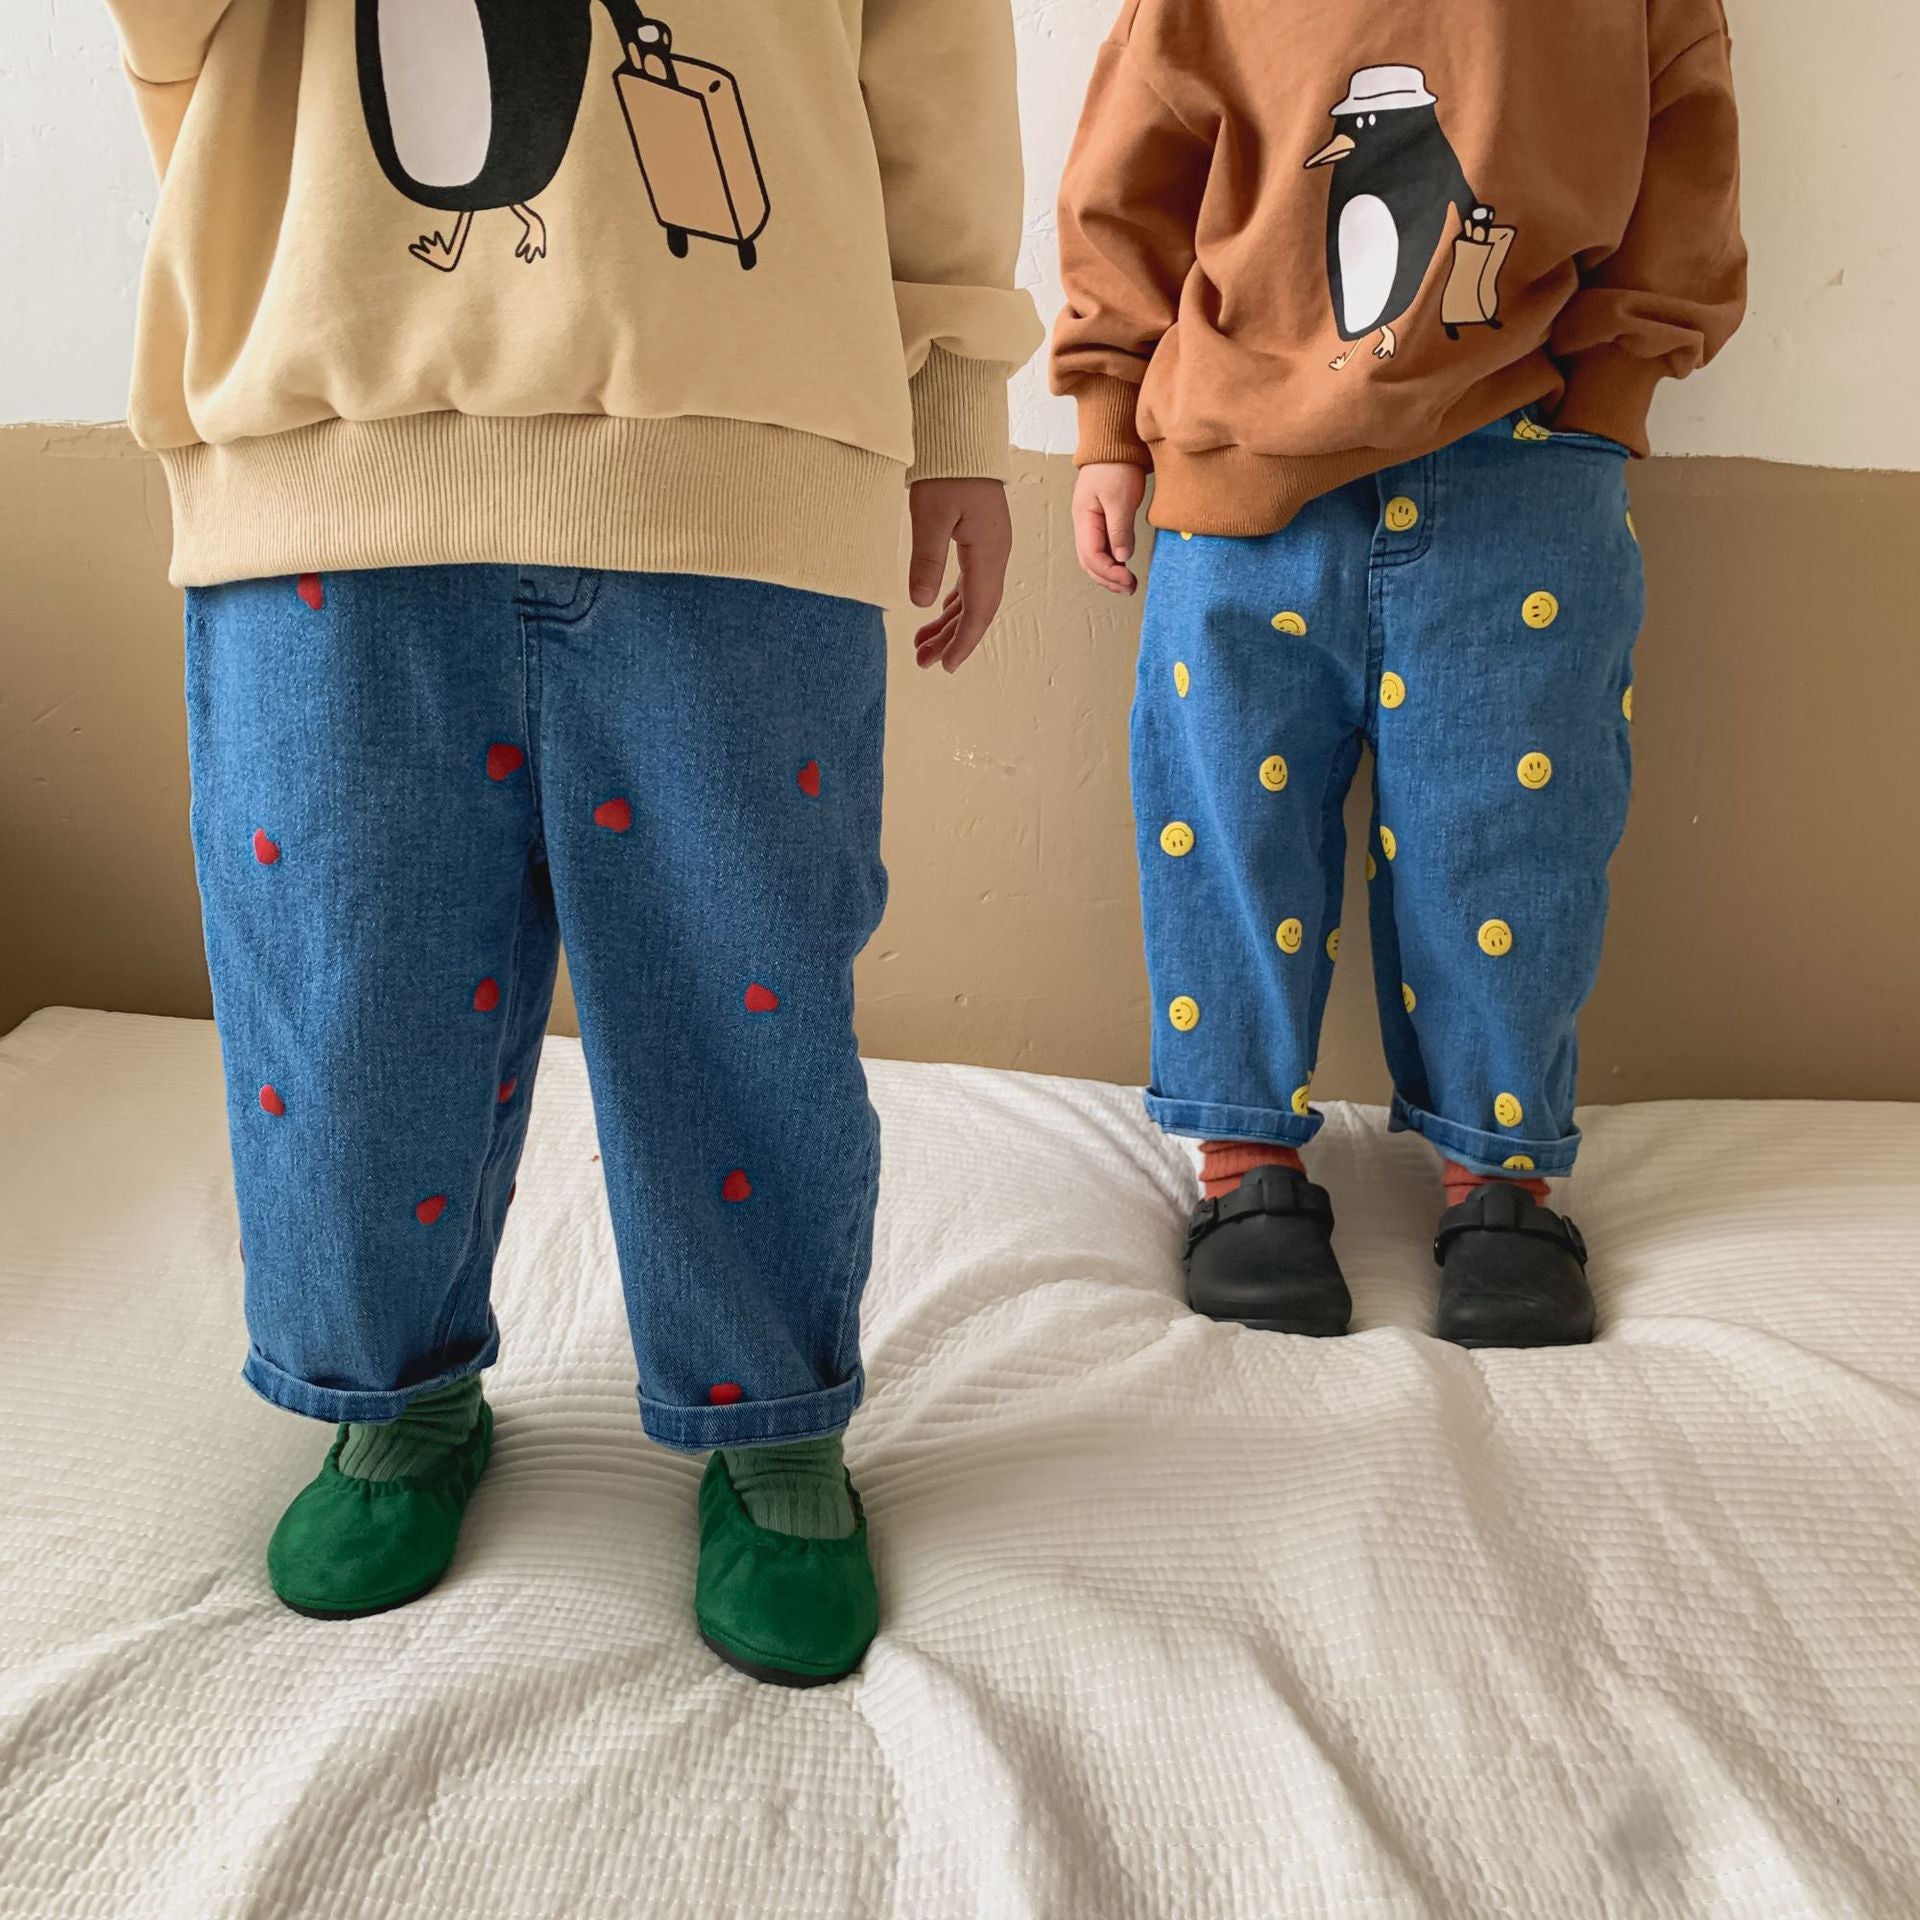 Cartoon Printed Cotton Jean Kids Jackets For Kids Perfect For Spring And  Autumn White And Blue From Superhero2, $12.88